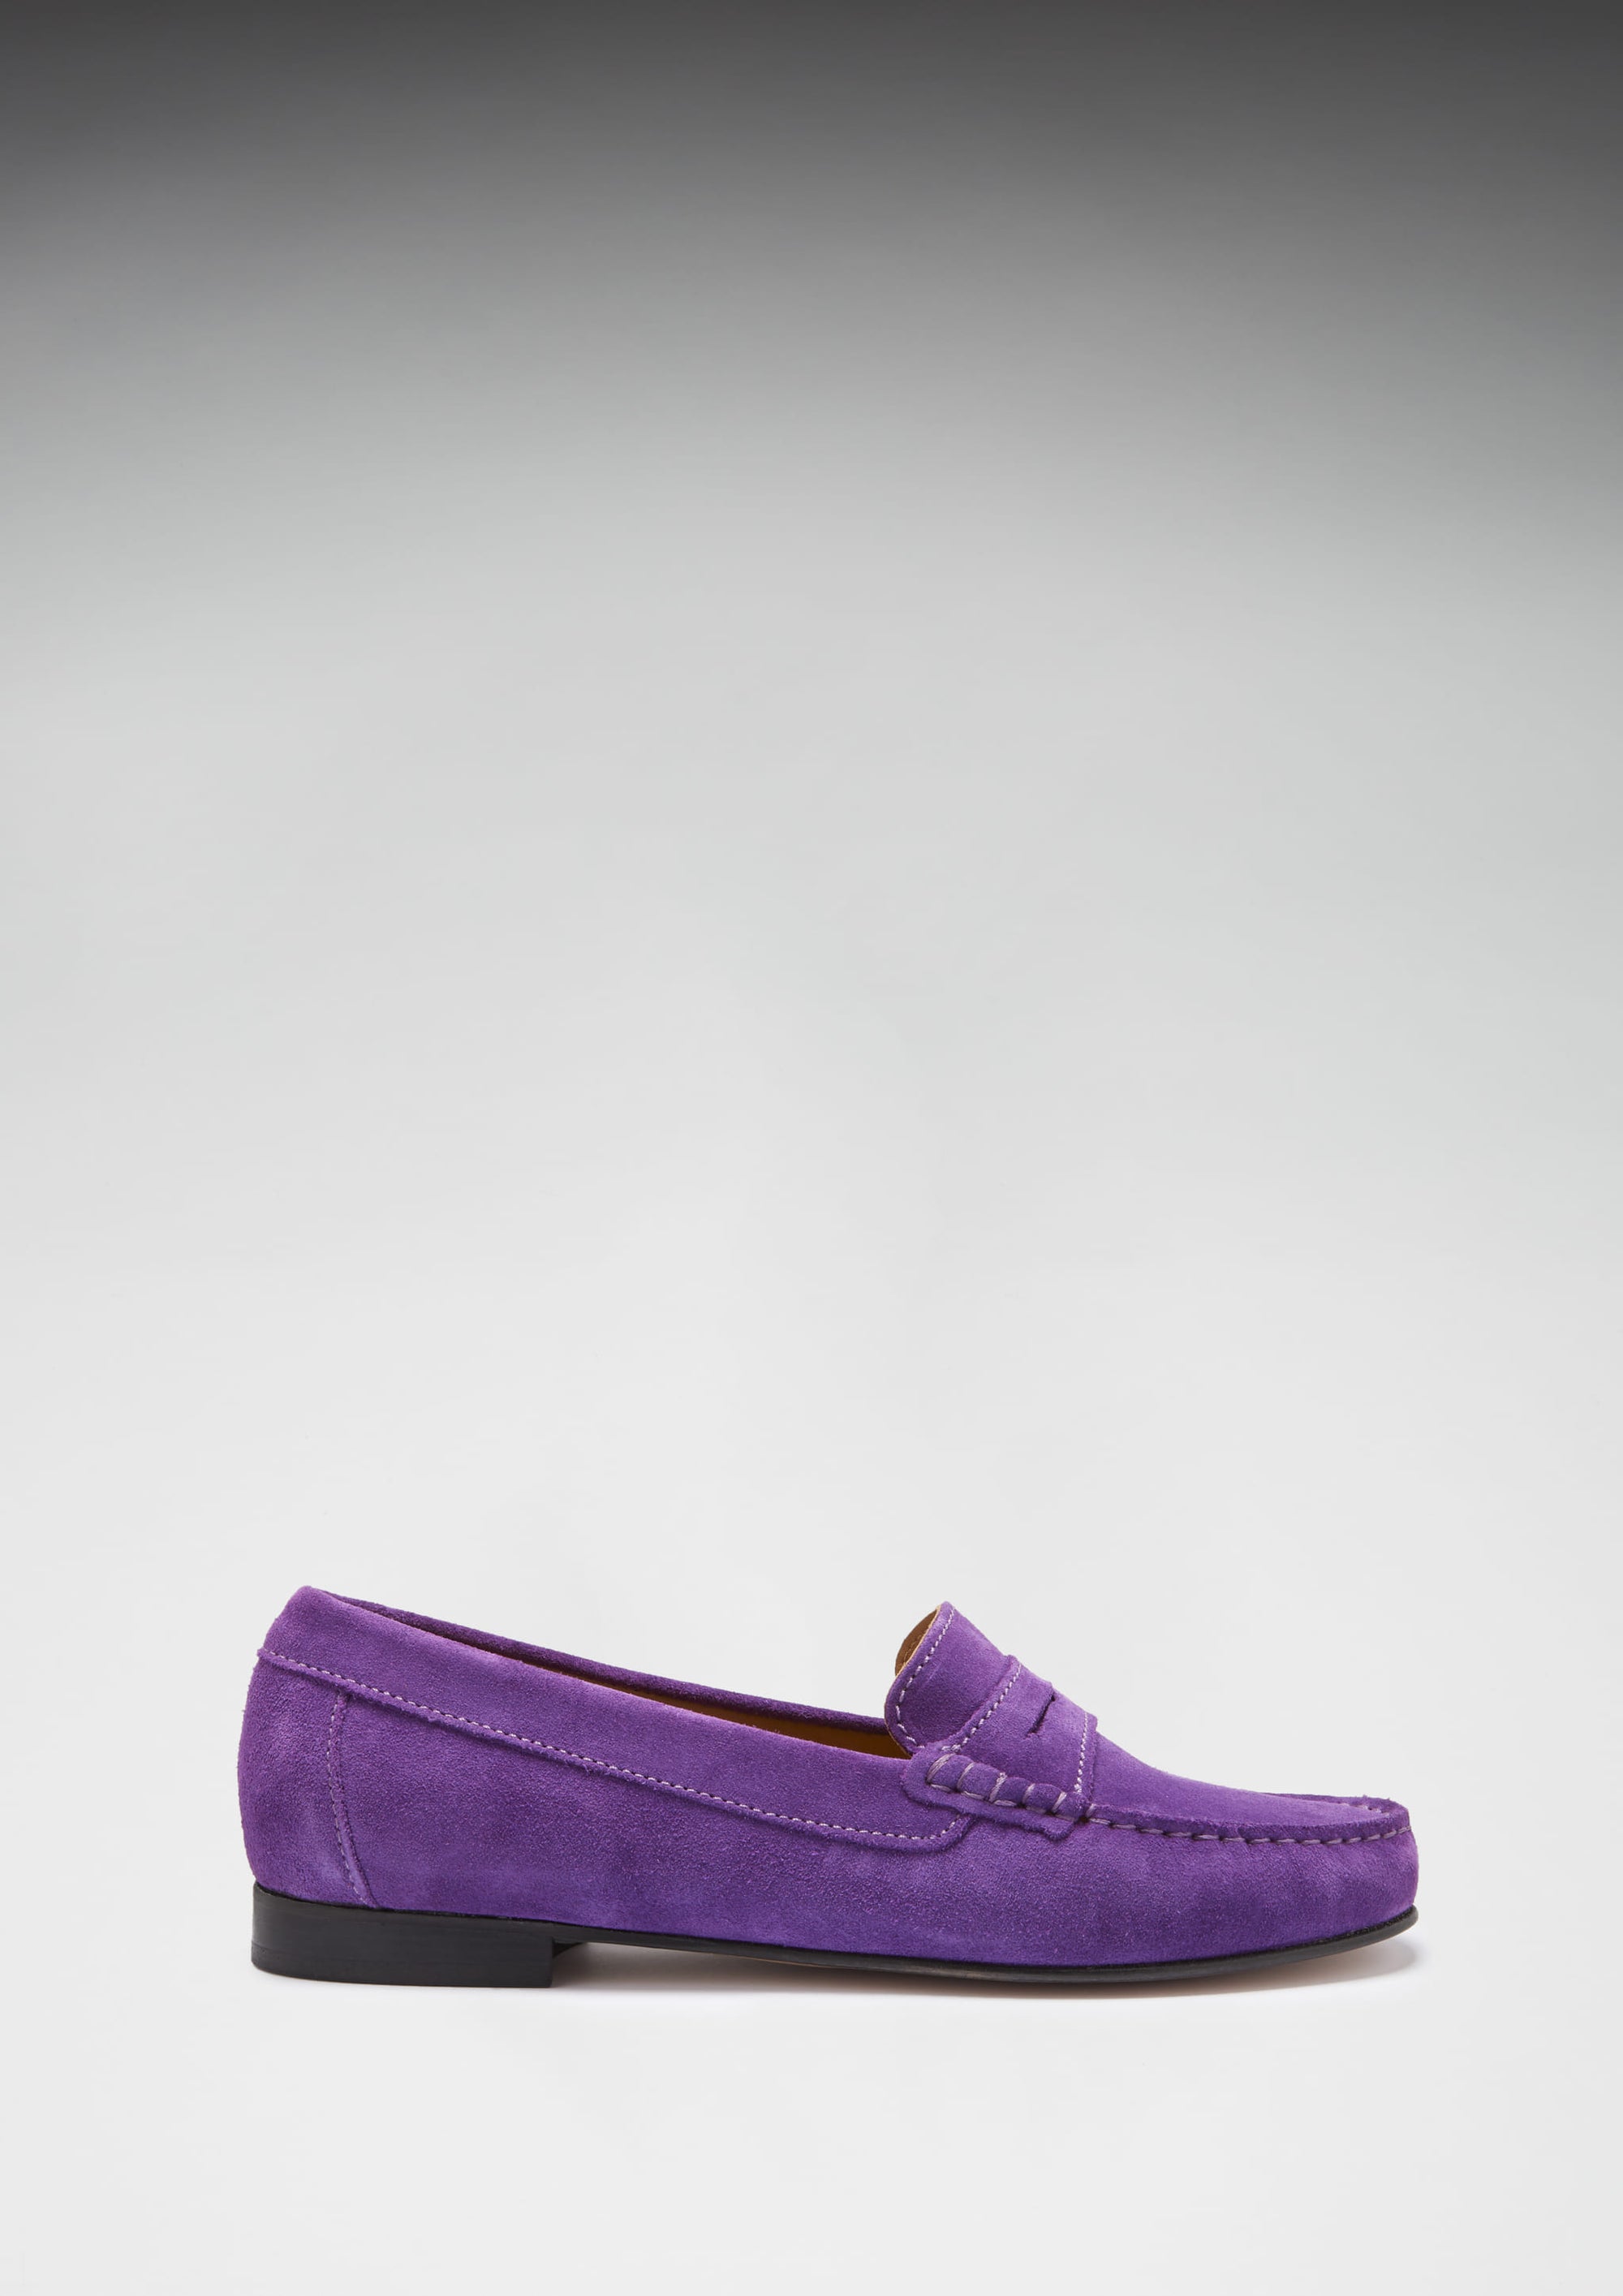 Women's Penny Loafers Leather Sole, purple suede